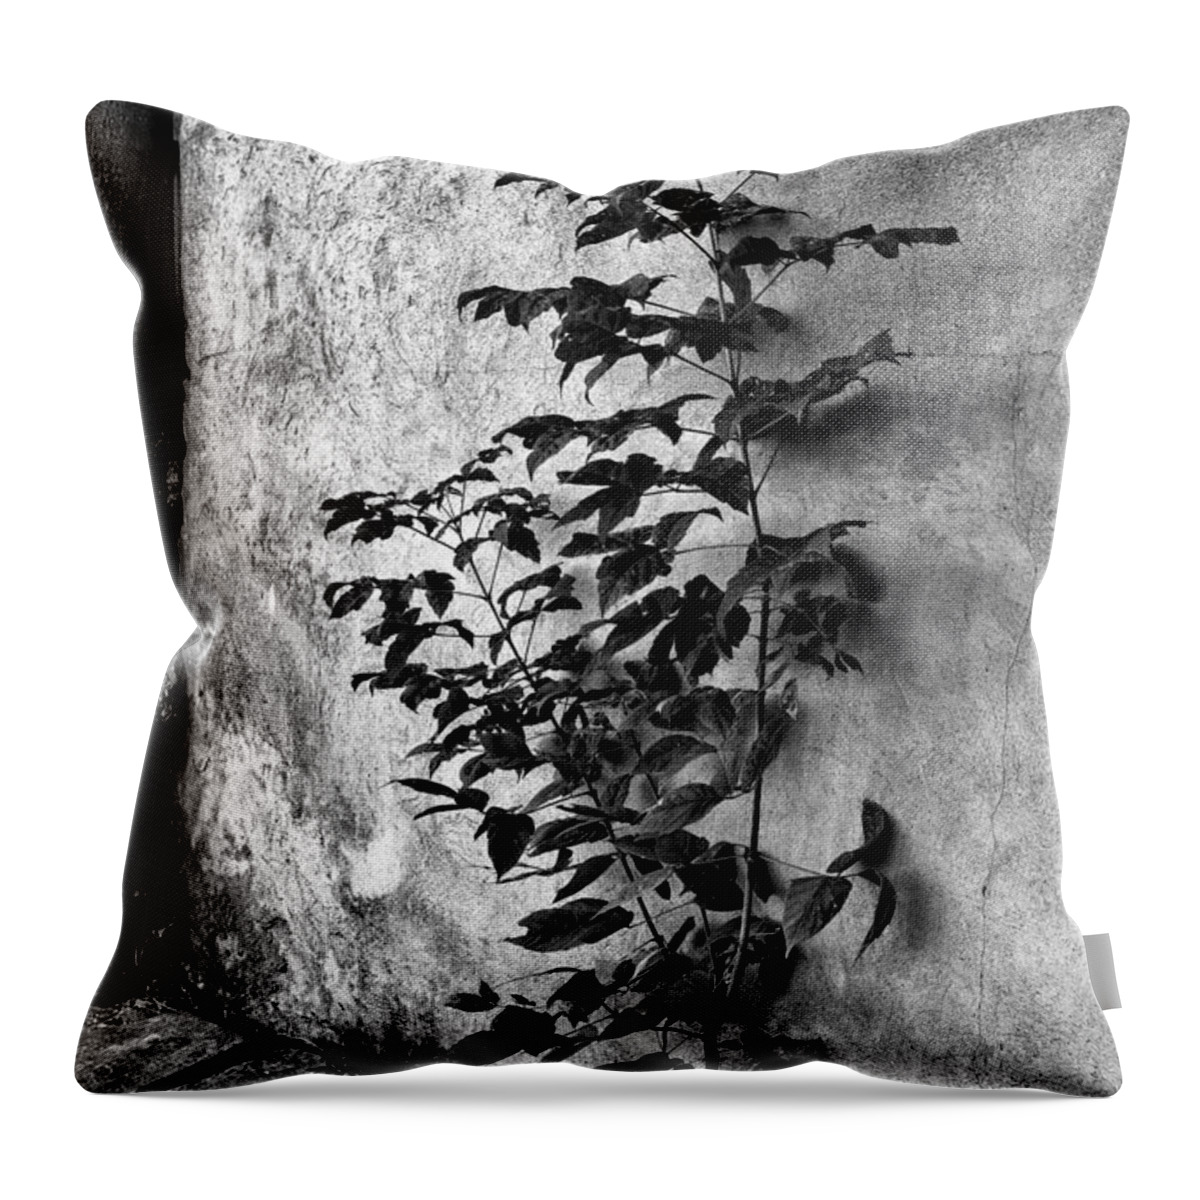 Power Of Nature Throw Pillow featuring the photograph Power of Nature by Tomasz Dziubinski